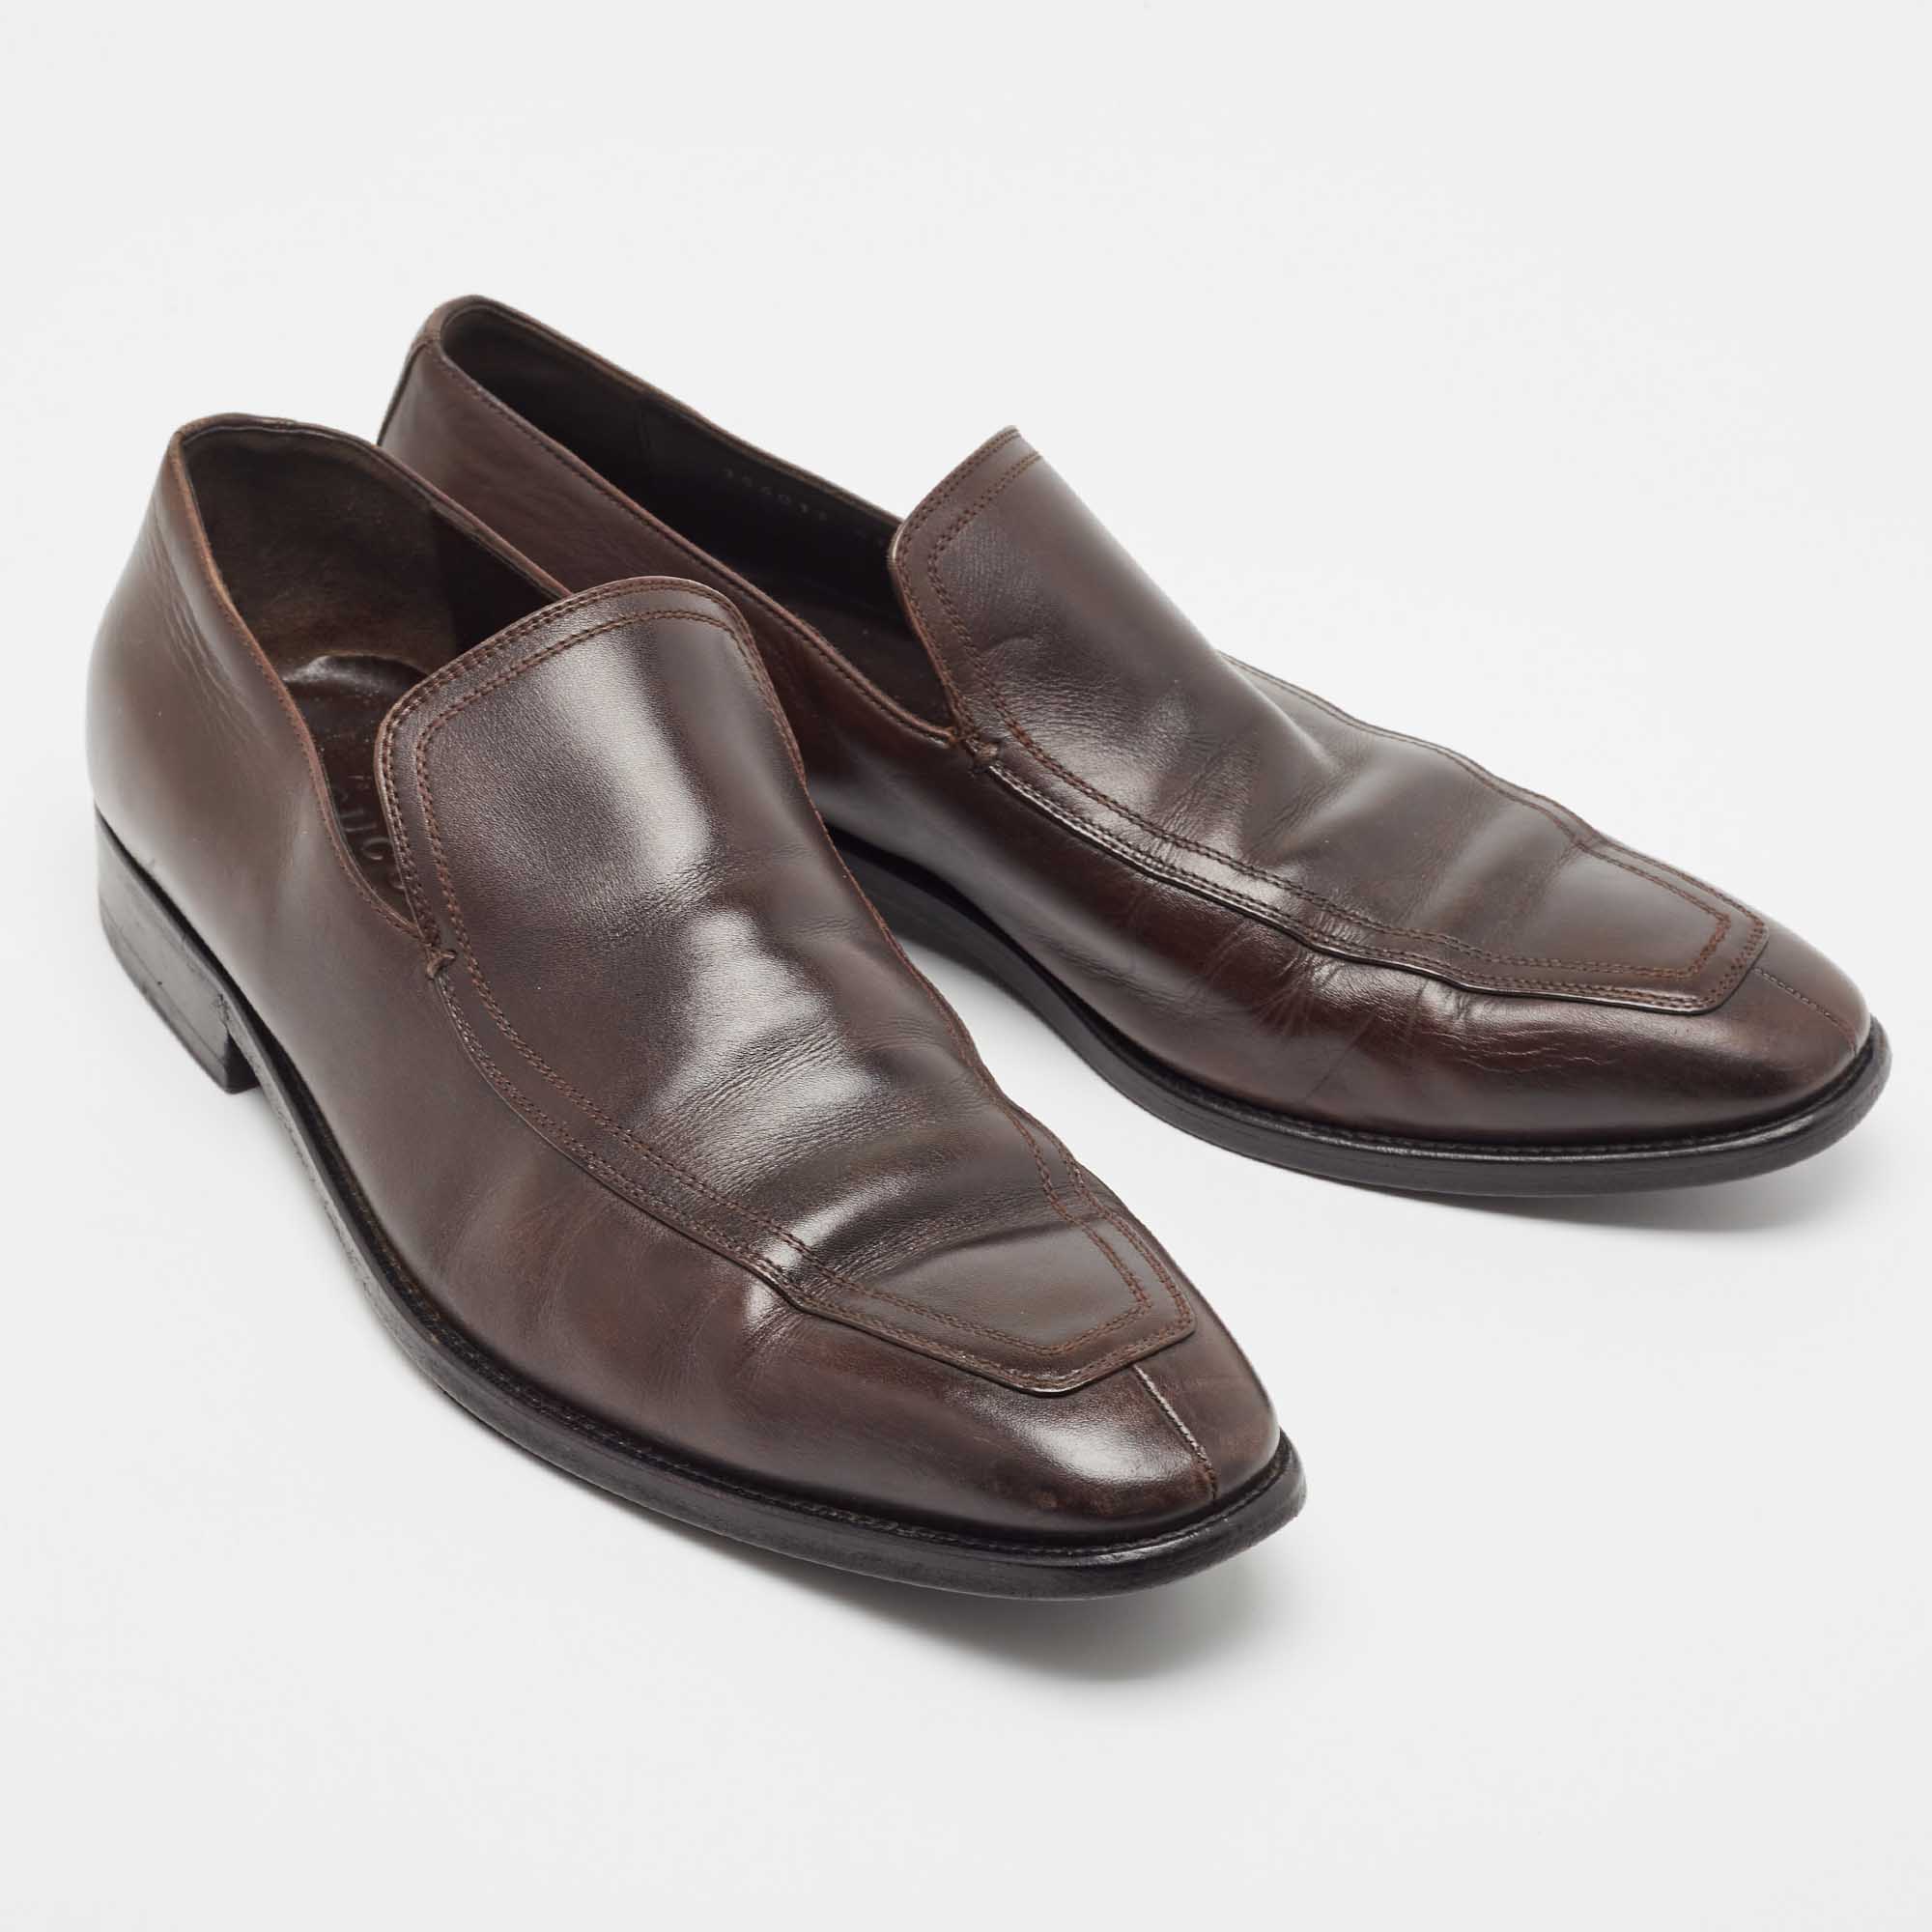 Gucci Brown Leather Horsebit Loafers Size 41